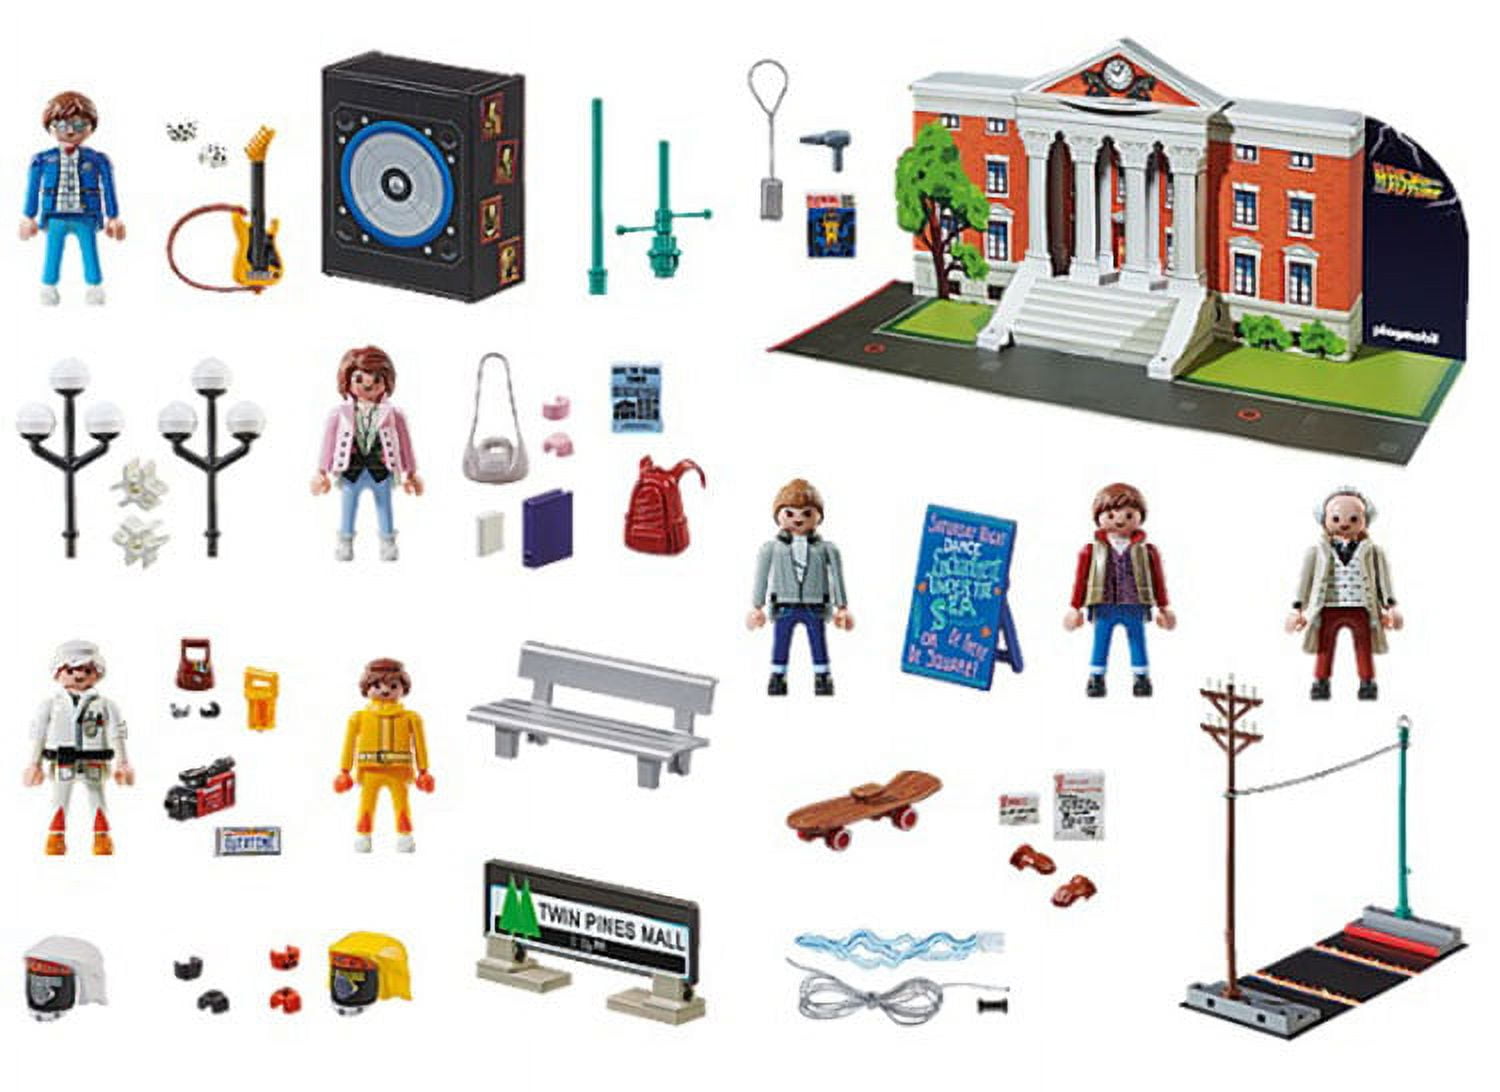 Back to the Future: Playmobil Back to the Future 97-piece Advent Calendar  with 7 vinyl figures